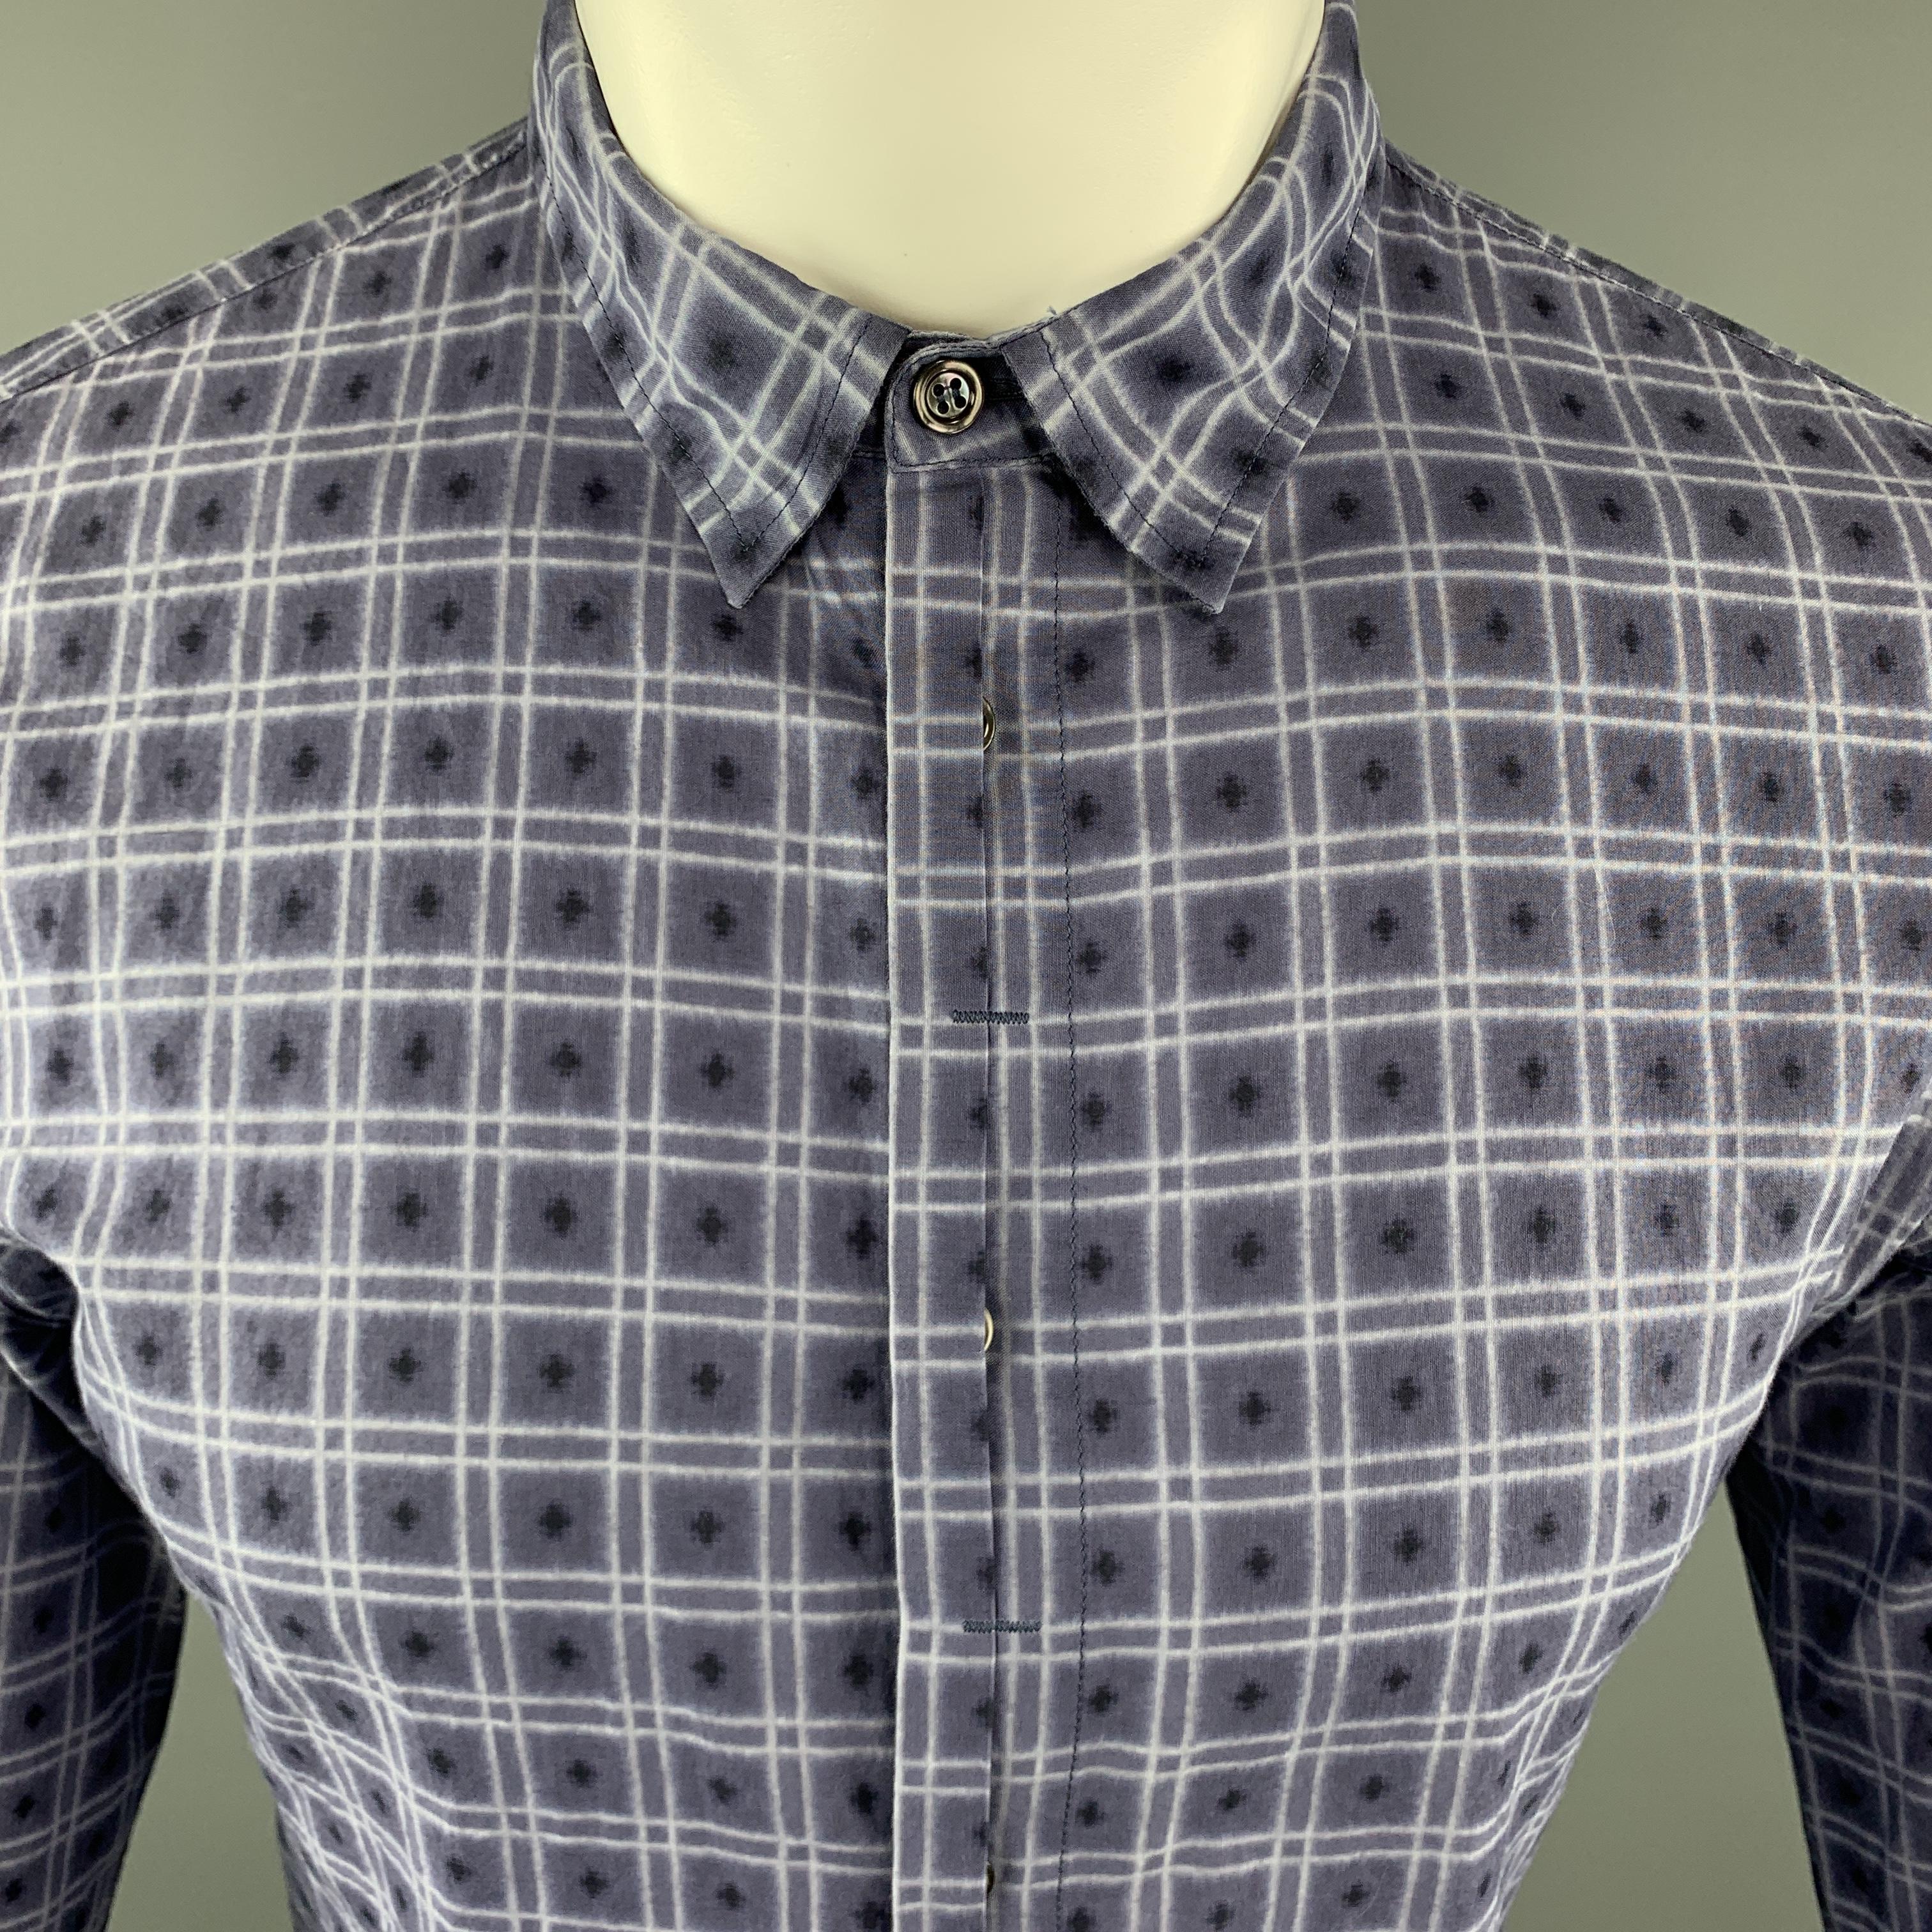 BOTTEGA VENETA Long Sleeve Shirt comes in navy tones in a square printed cotton material, with a pointed collar, hidden buttons at closure, buttoned cuffs, button up. Made in Italy.
 
Excellent Pre-Owned Condition.
Marked: IT 50
 
Measurements:
